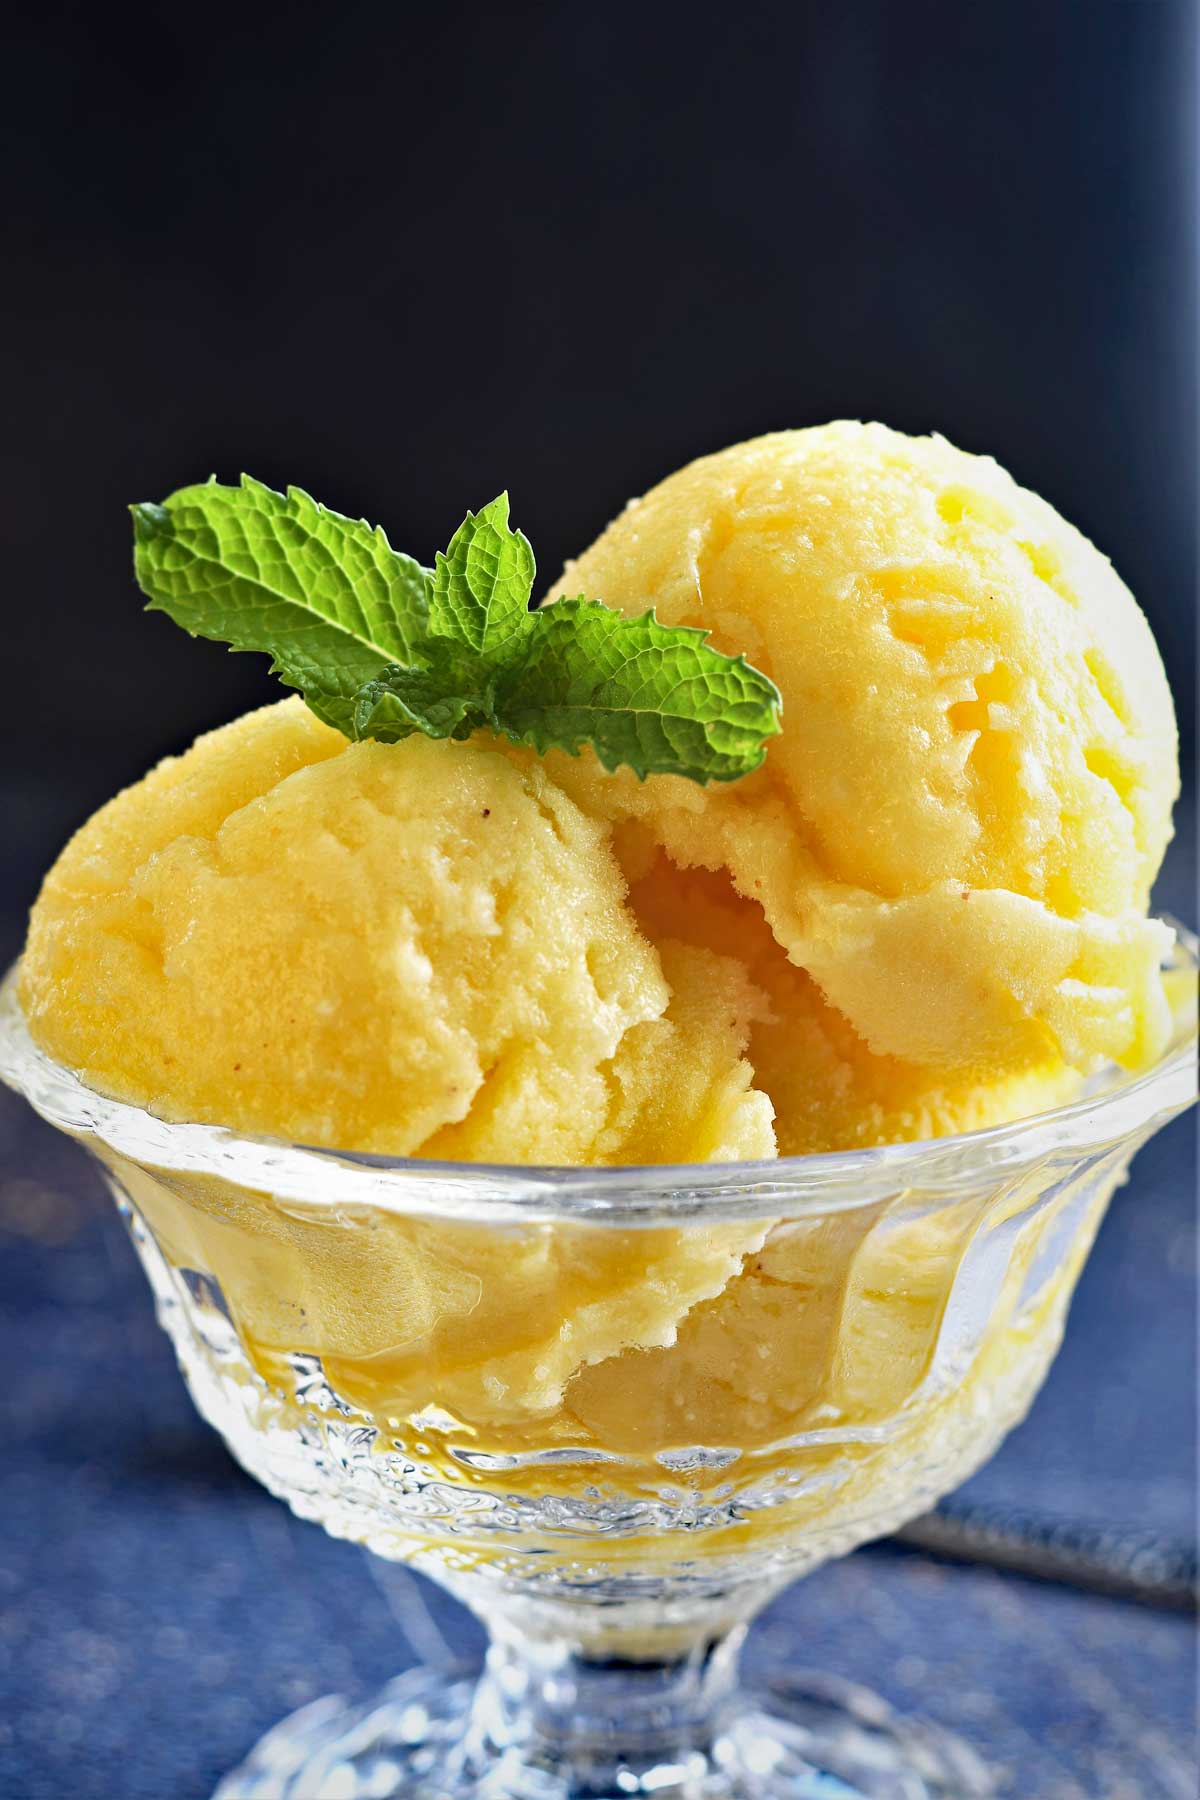 Pineapple sorbet ice cream scoops in a glass stem bowl with mint leaves.